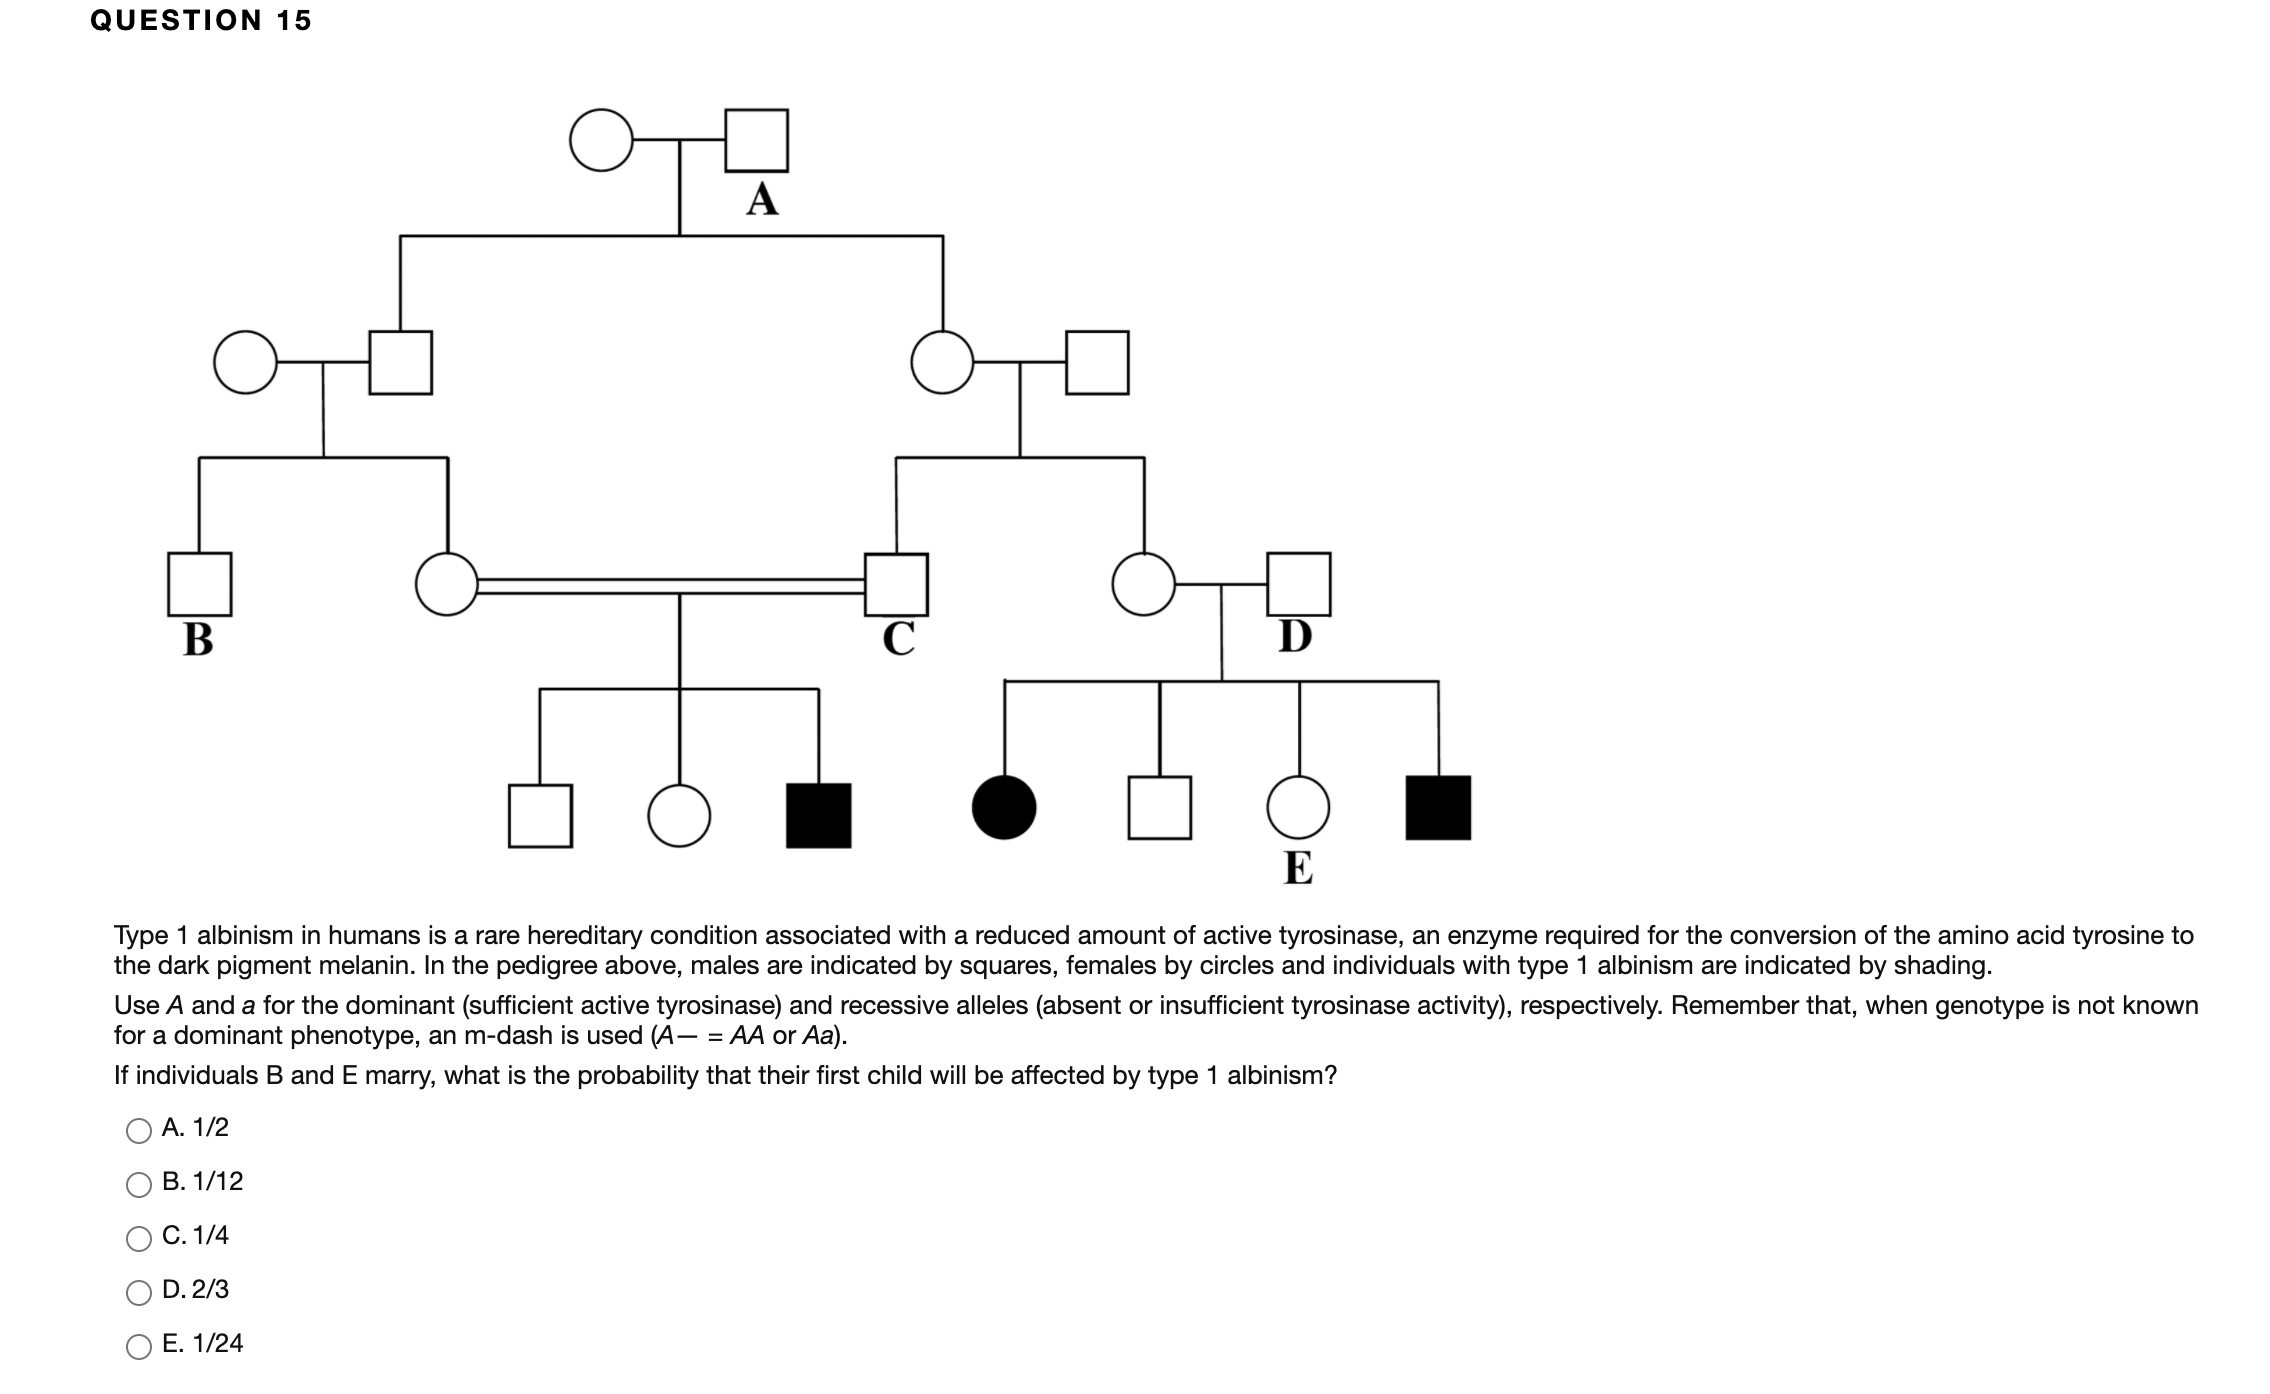 Type 1 albinism in humans is a rare hereditary condition associated with a reduced amount of active tyrosinase, an enzyme required for the conversion of the amino acid tyrosine to
the dark pigment melanin. In the pedigree above, males are indicated by squares, females by circles and individuals with type 1 albinism are indicated by shading.
Use A and a for the dominant (sufficient active tyrosinase) and recessive alleles (absent or insufficient tyrosinase activity), respectively. Remember that, when genotype is not known
for a dominant phenotype, an m-dash is used (A– = AA or Aa).
If individuals B and E marry, what is the probability that their first child will be affected by type 1 albinism?
А. 1/2
В. 1/12
С. 1/4
D. 2/3
O E. 1/24
